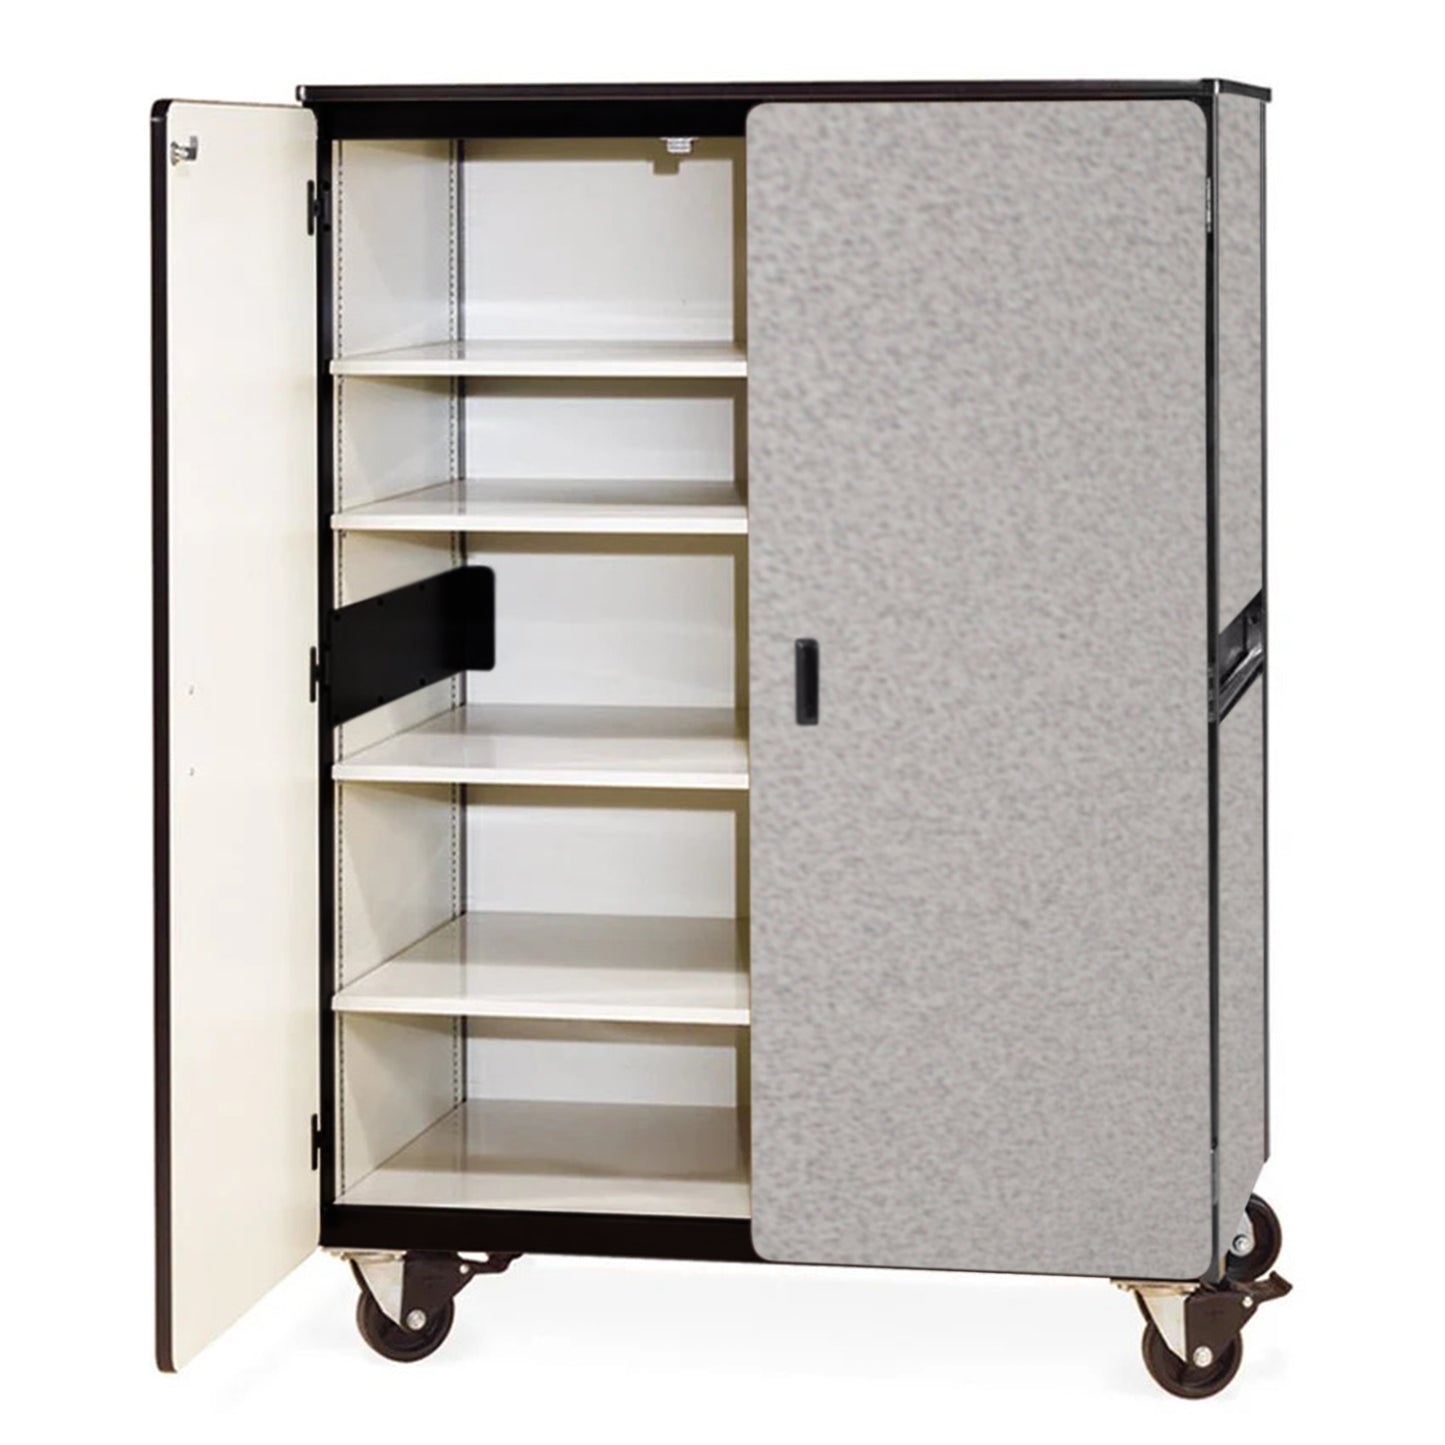 Virco 2501MMB - Mobile Storage Cabinet With Four Adjustable Steel Shelves, Two Hinged Doors, Magnetic Marker Back - 48"W x 28"D x 66"H (Virco 2501MMB)